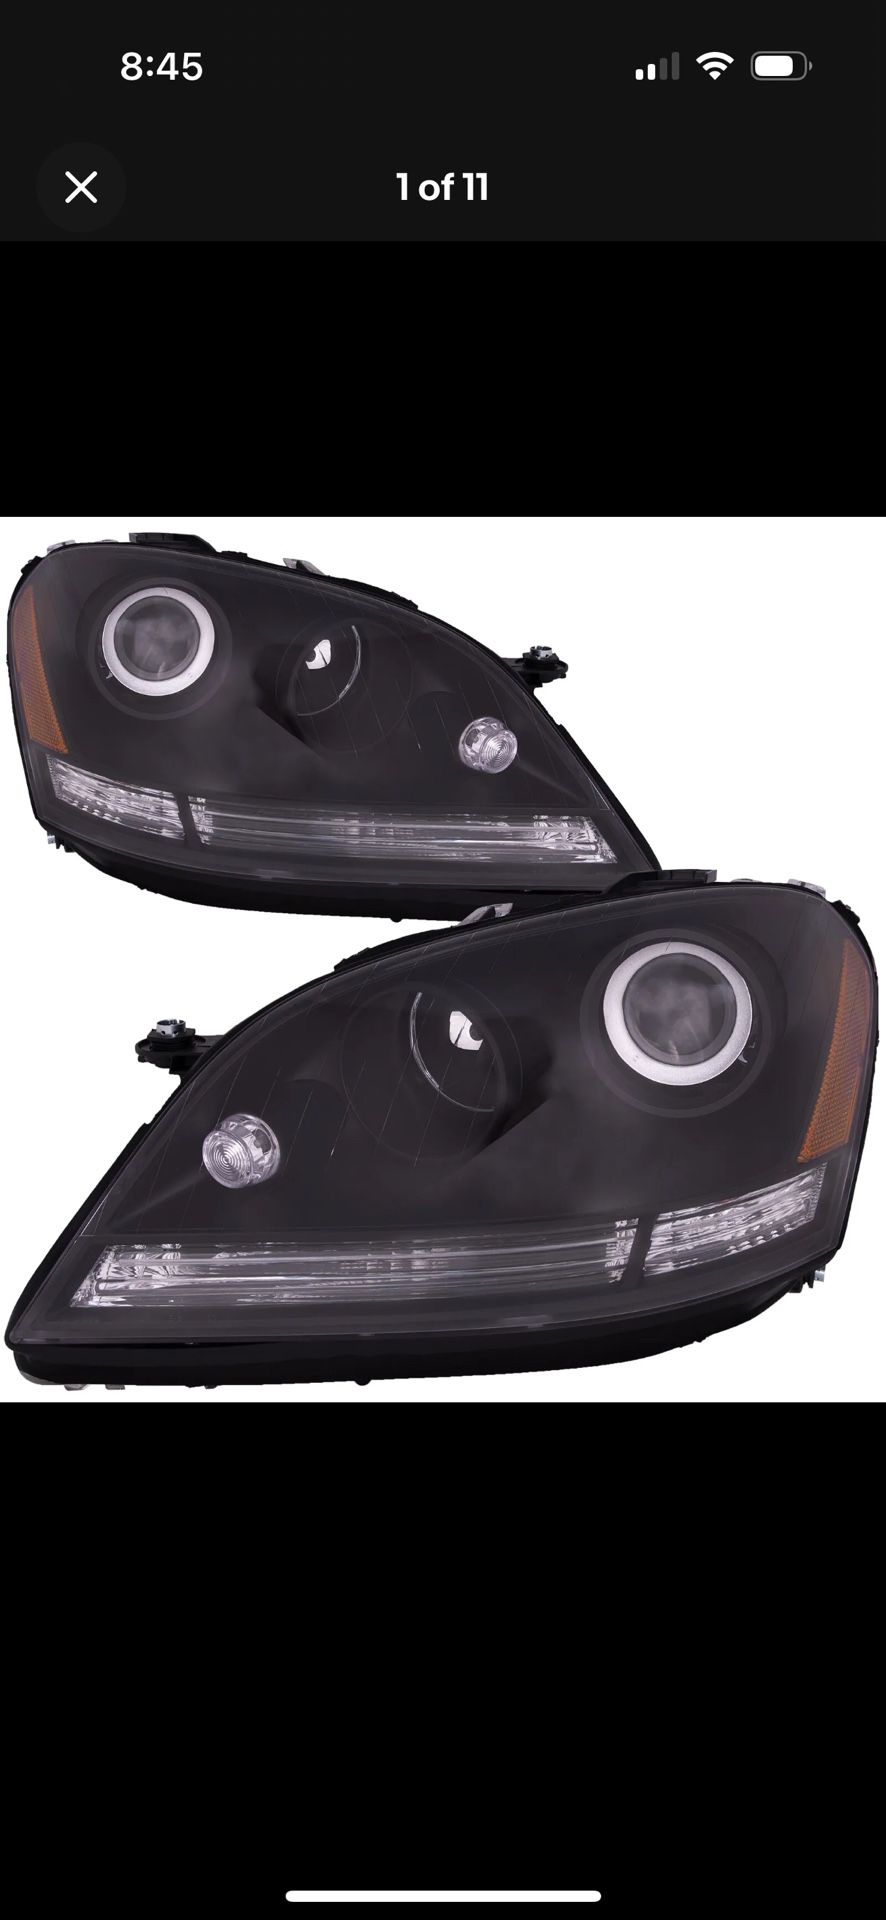 New Headlight Pair For Mercedes-Benz ML350 06-09 Headlamp Right Hand And Left Side